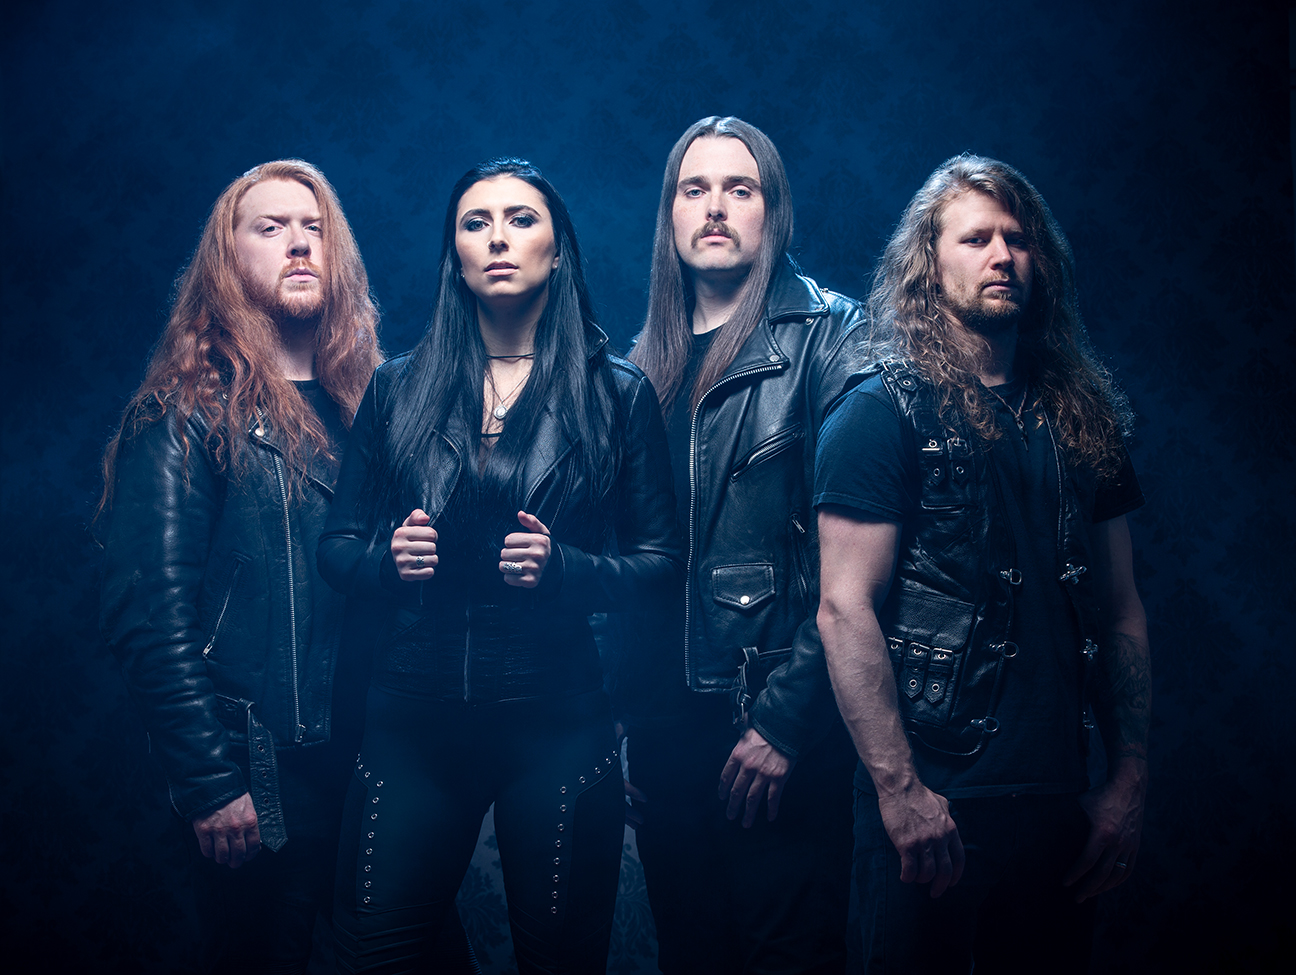 Unleash The Archers - 'The Abyss Strikes Back' Tour! - The Beast